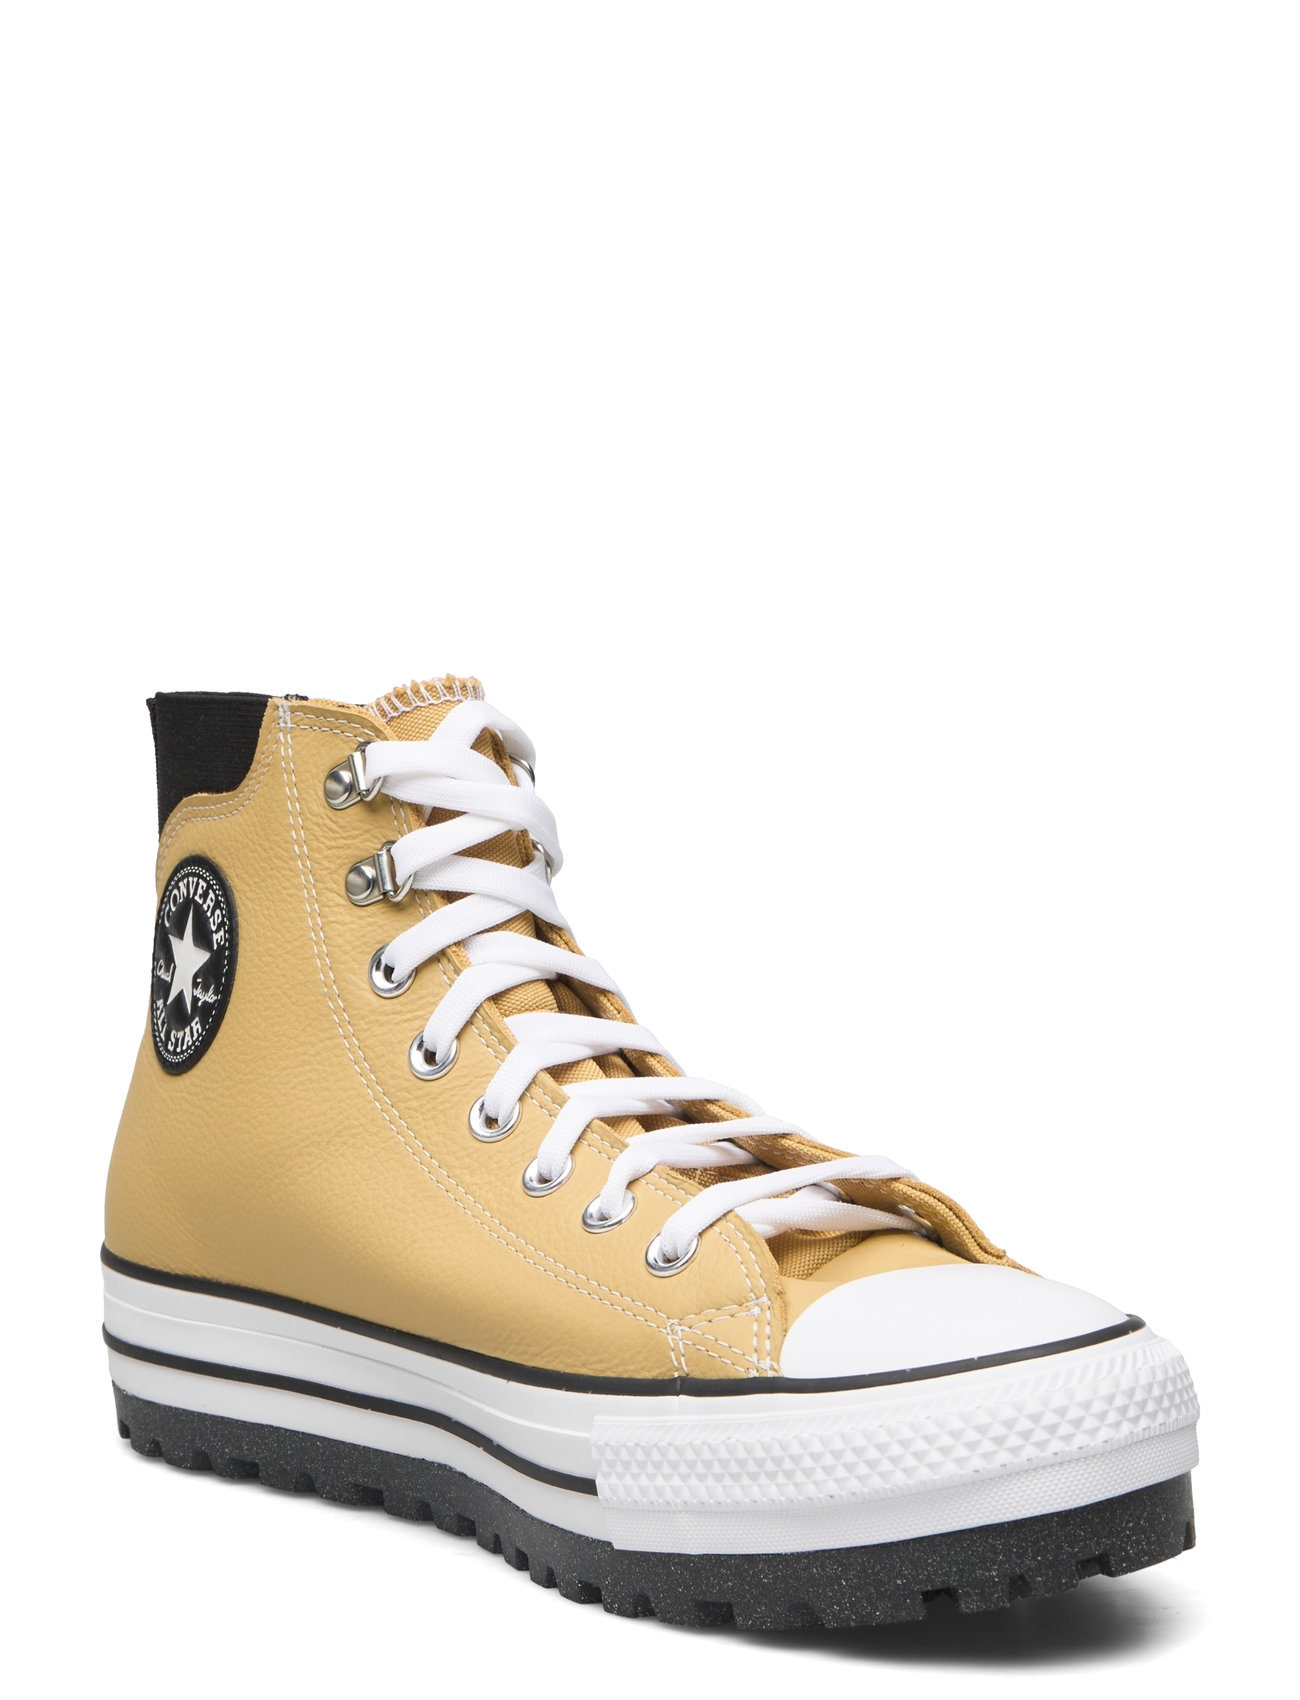 Chuck Taylor All Star City Trek Wp Sport Sneakers High-top Sneakers Yellow Converse